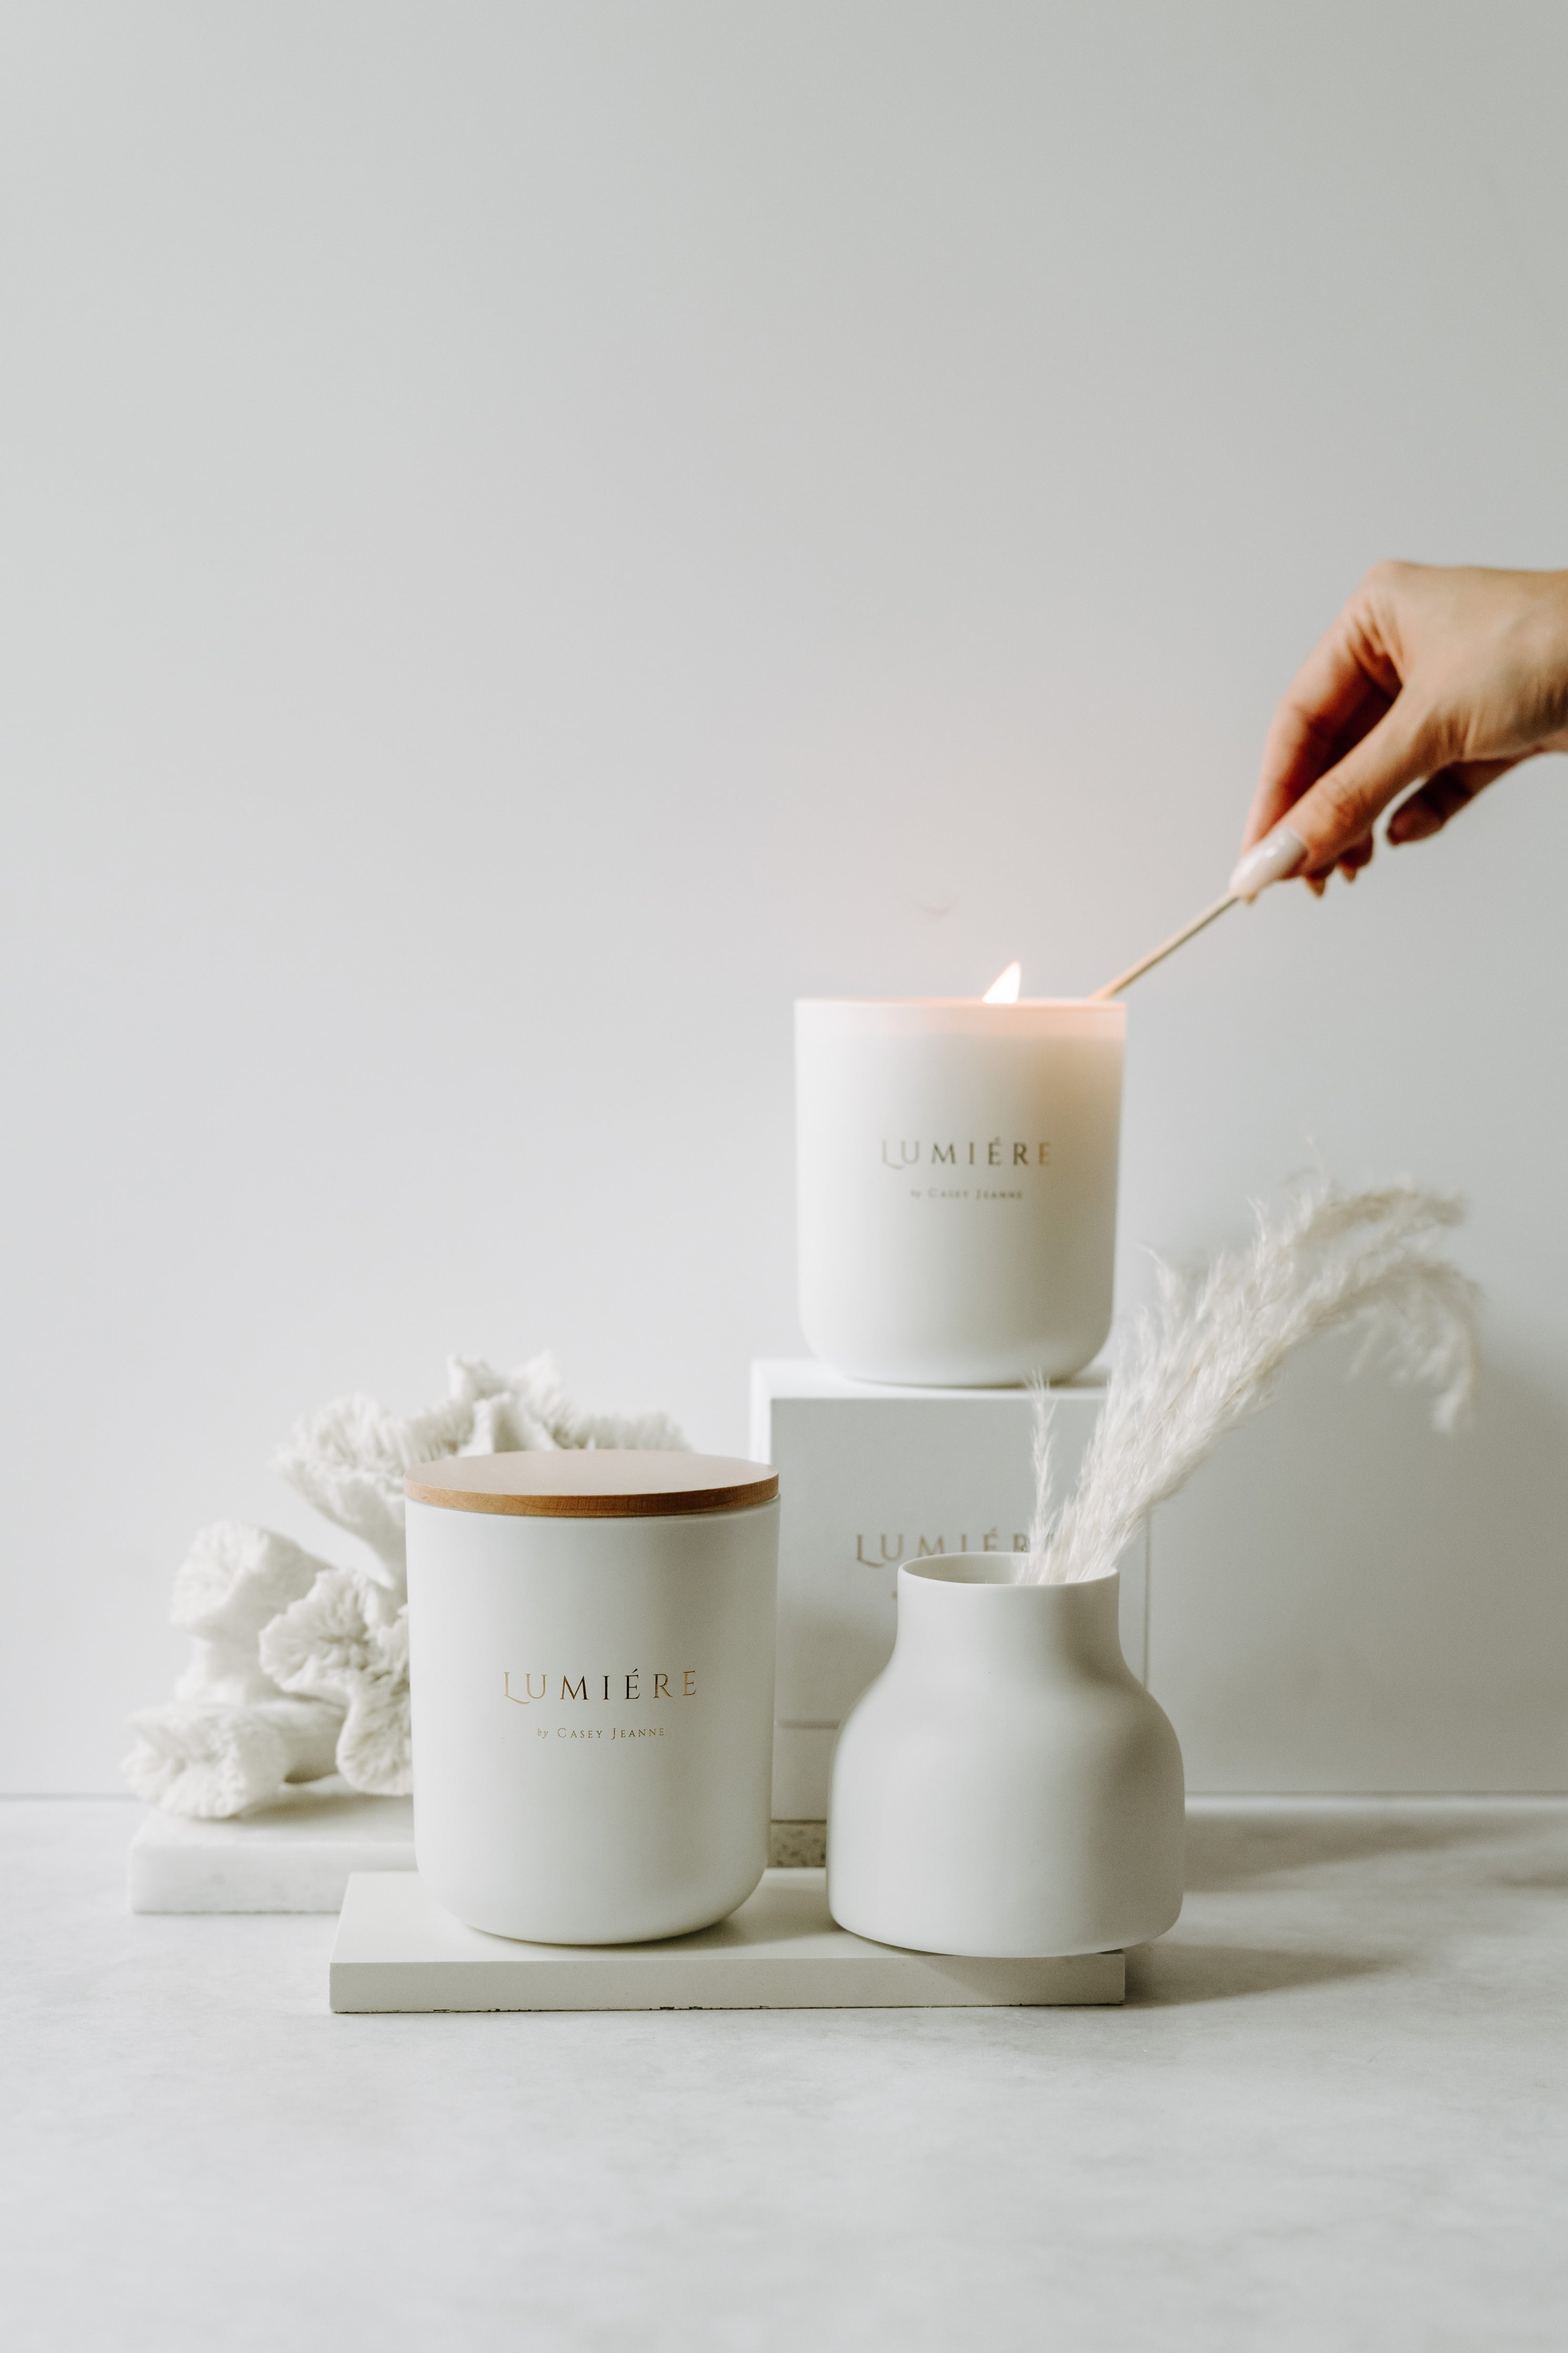 Sea Island Cotton – Lumiére by Casey Jeanne